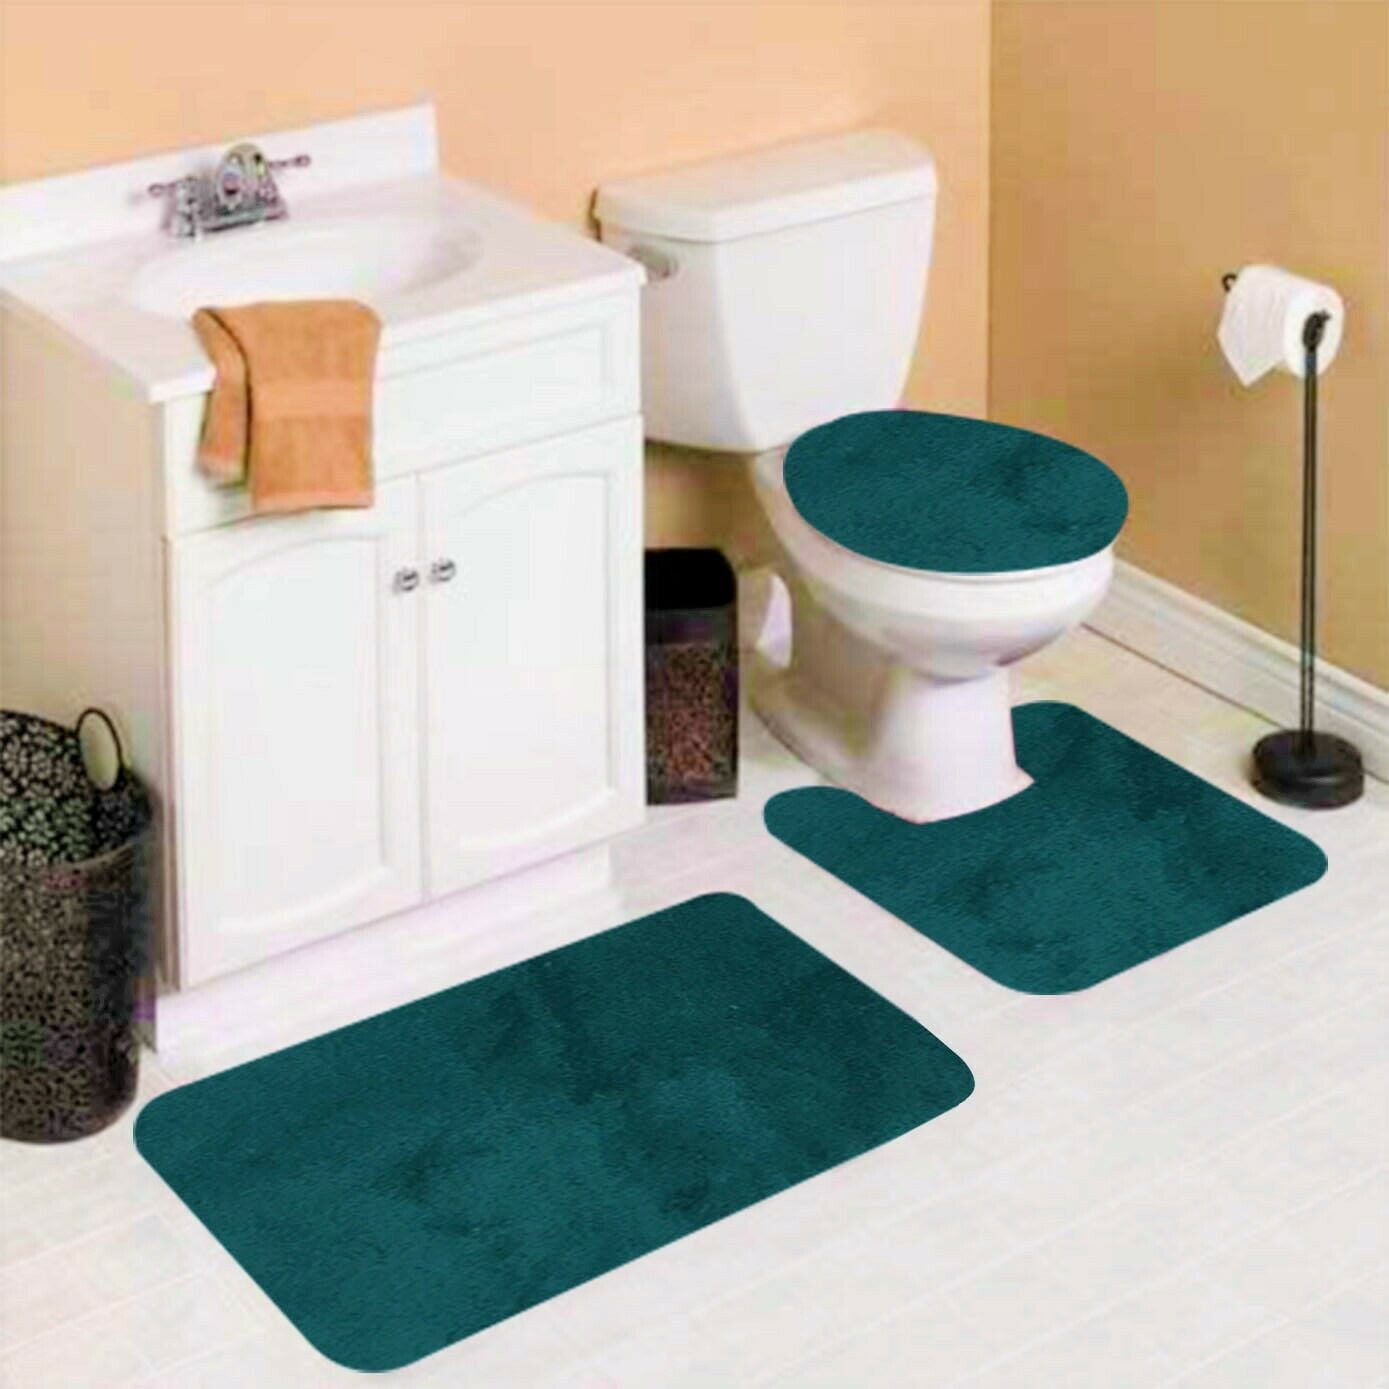 Set For Bathroom 3 Pieces Bath Mat Includes, 1 Contour Mat, 1 Lid Toilet Cover, 1 Bath Mat Ultra Absorbent with Anti-Slip With Rubber Backing #6 Hunter Solid Color